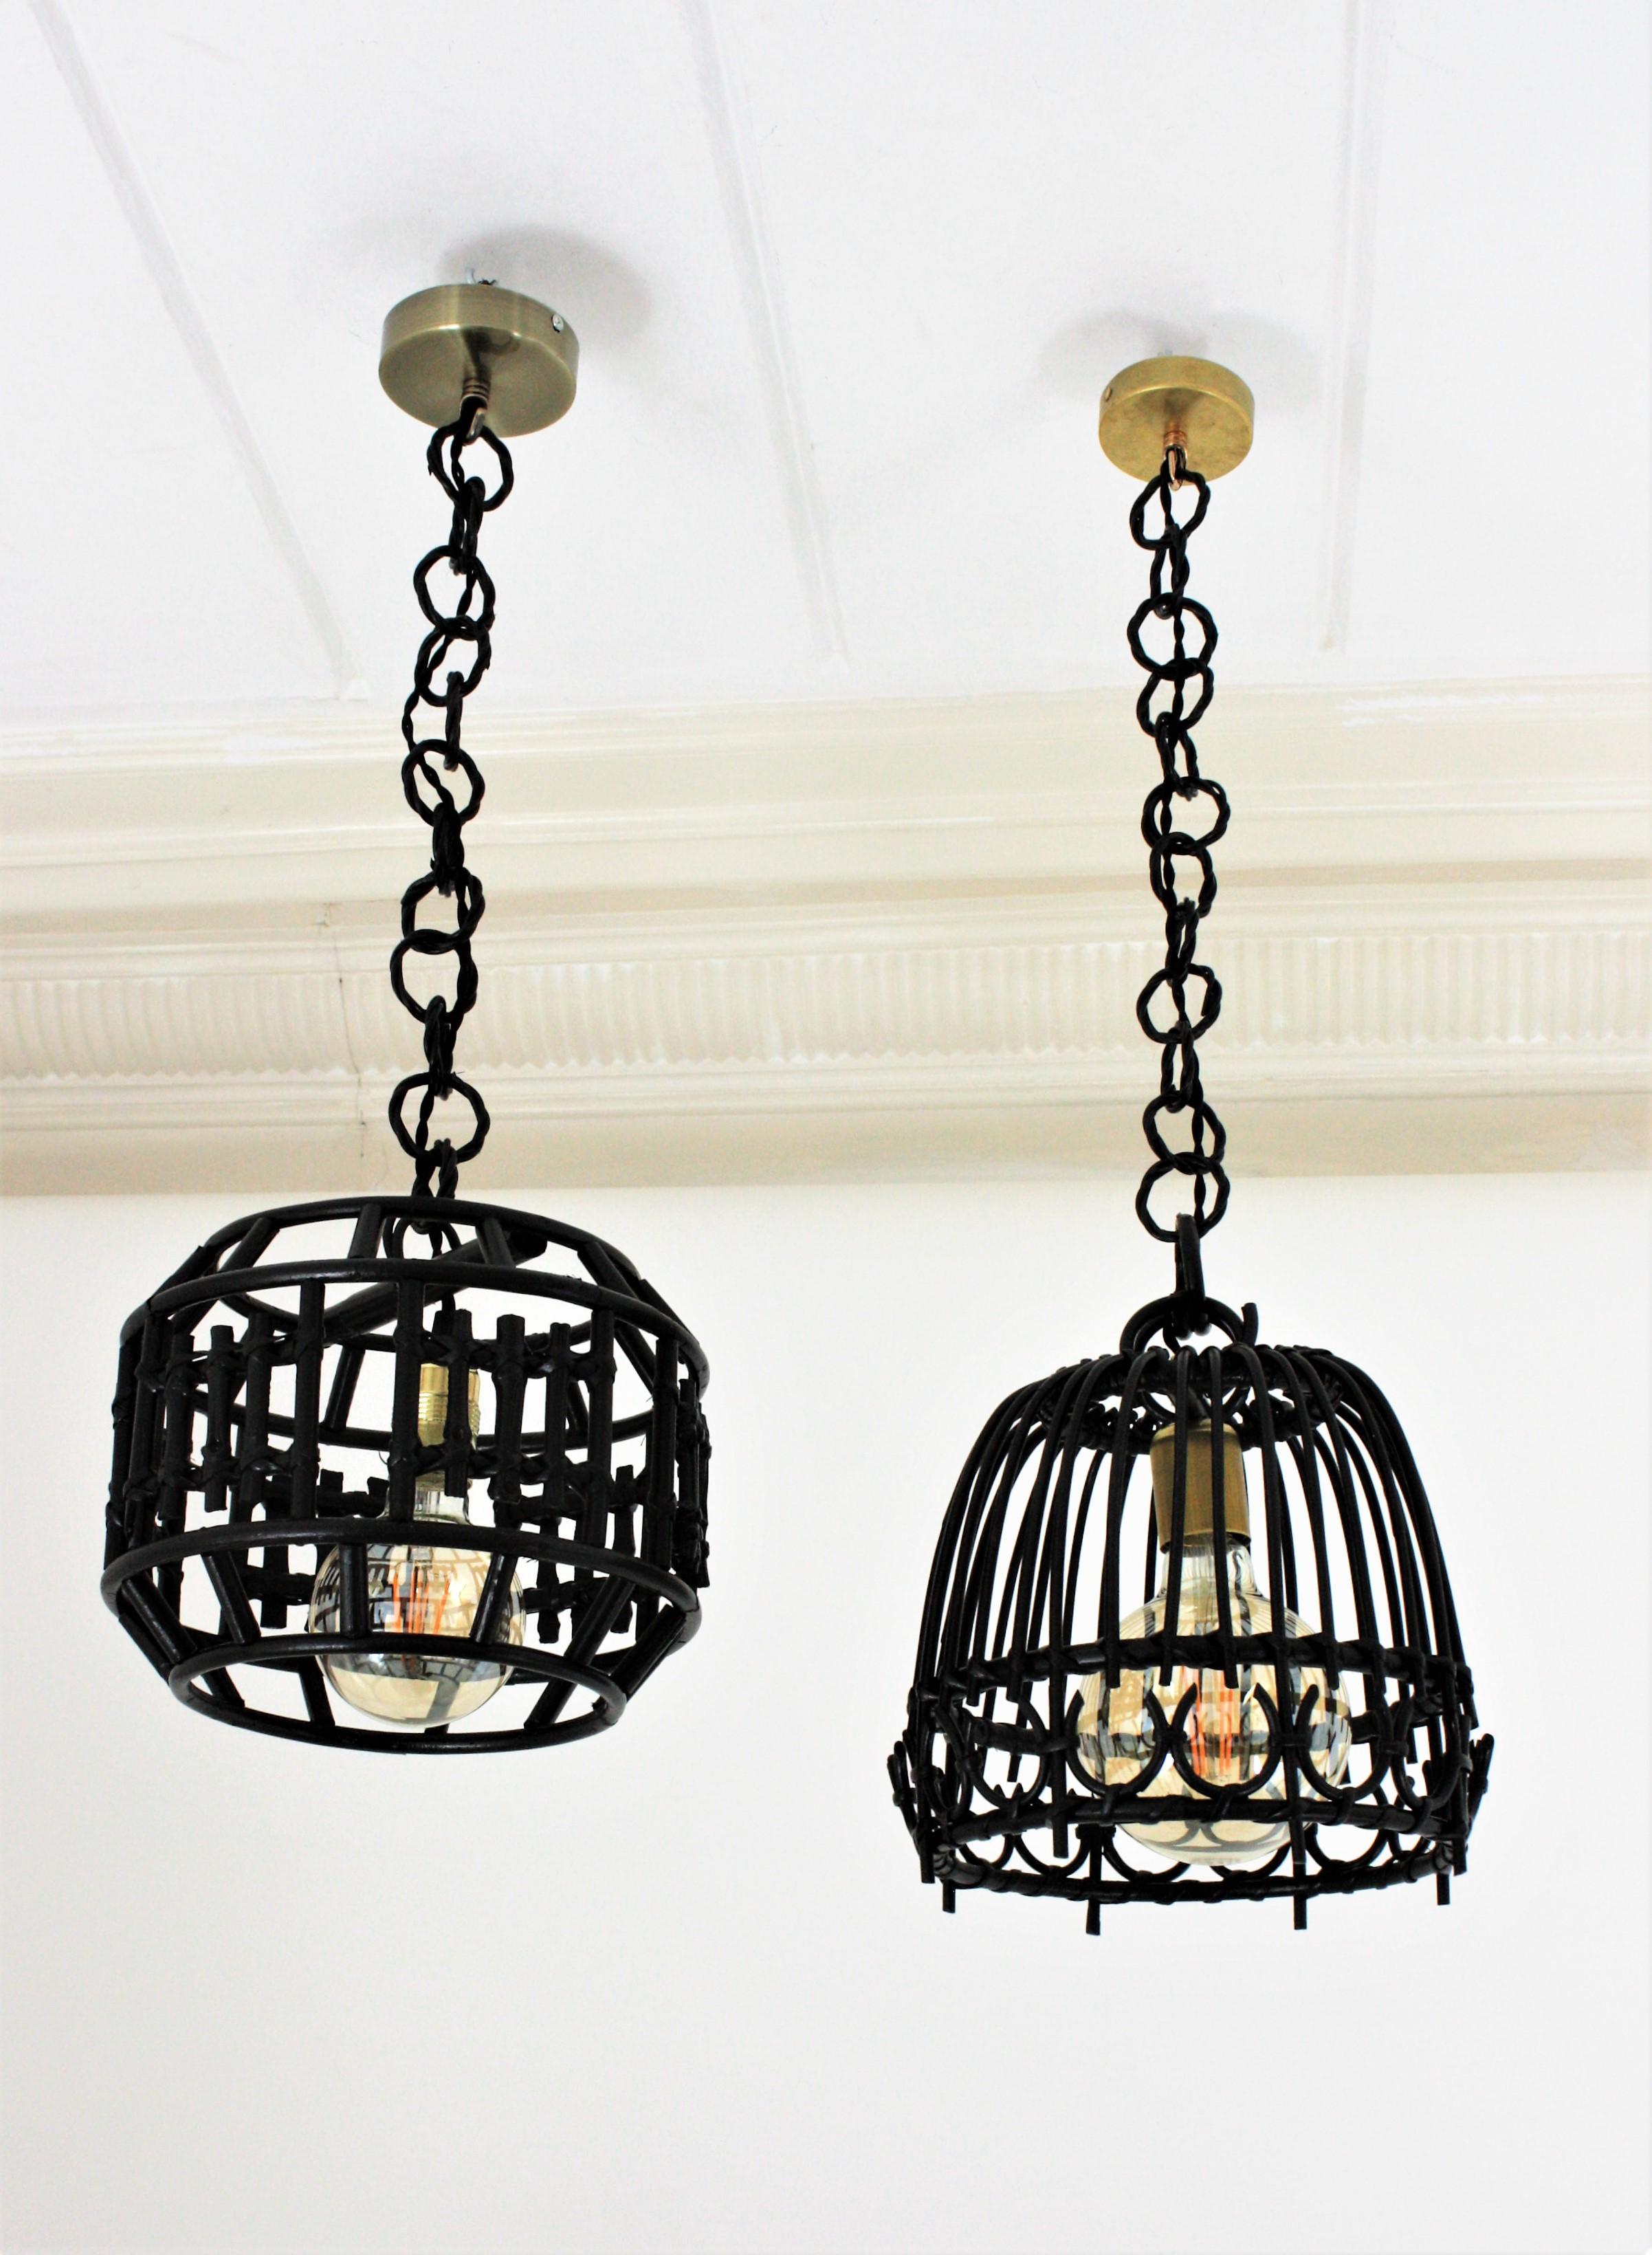 Rattan Bell Pendant or Hanging Light in Black Patina, Spain, 1960s For Sale 3